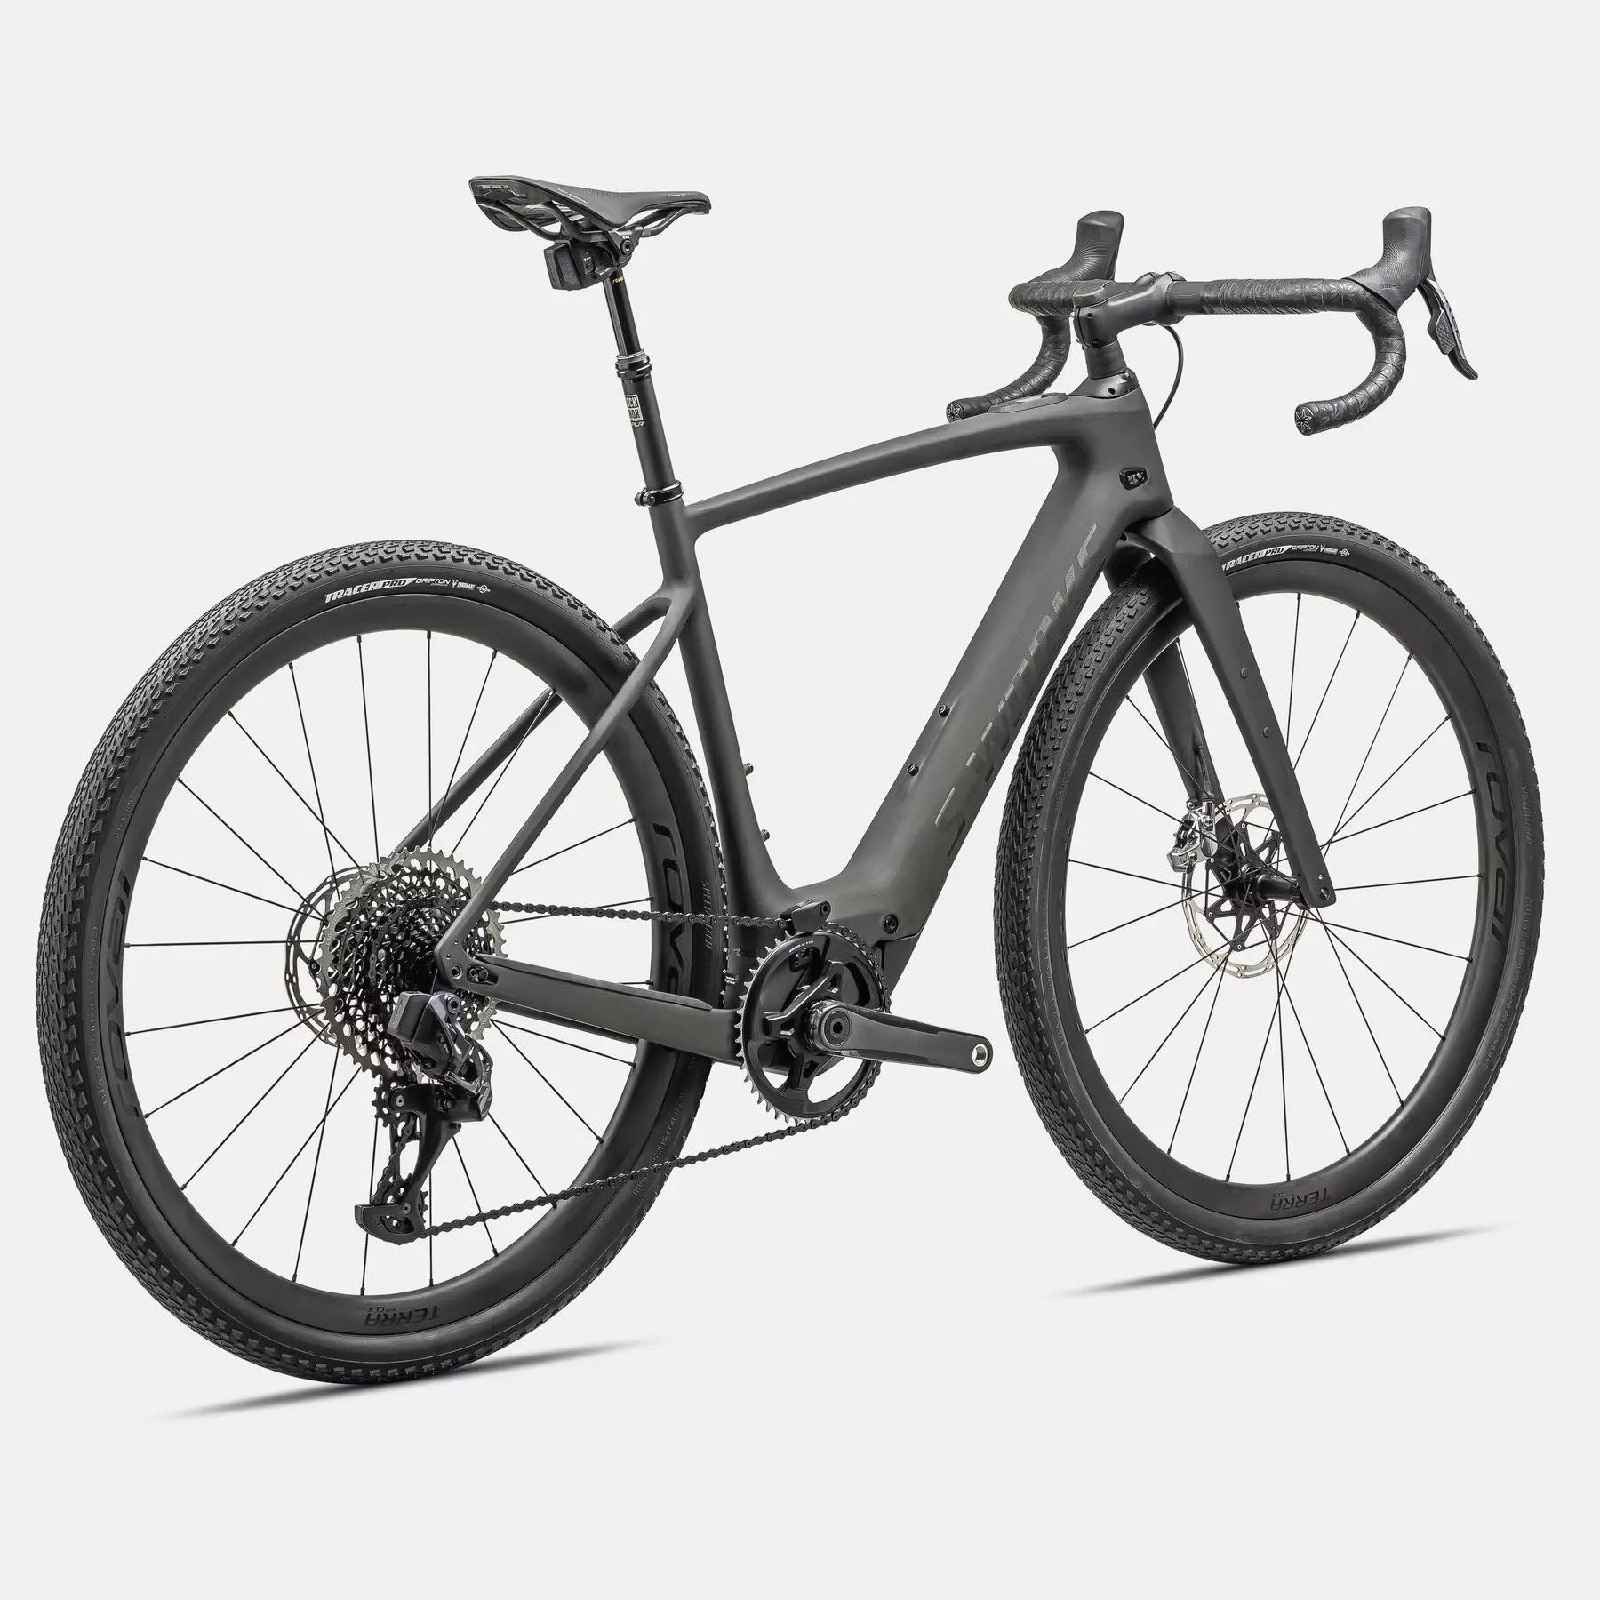 CREO 2 S-Works CARBON